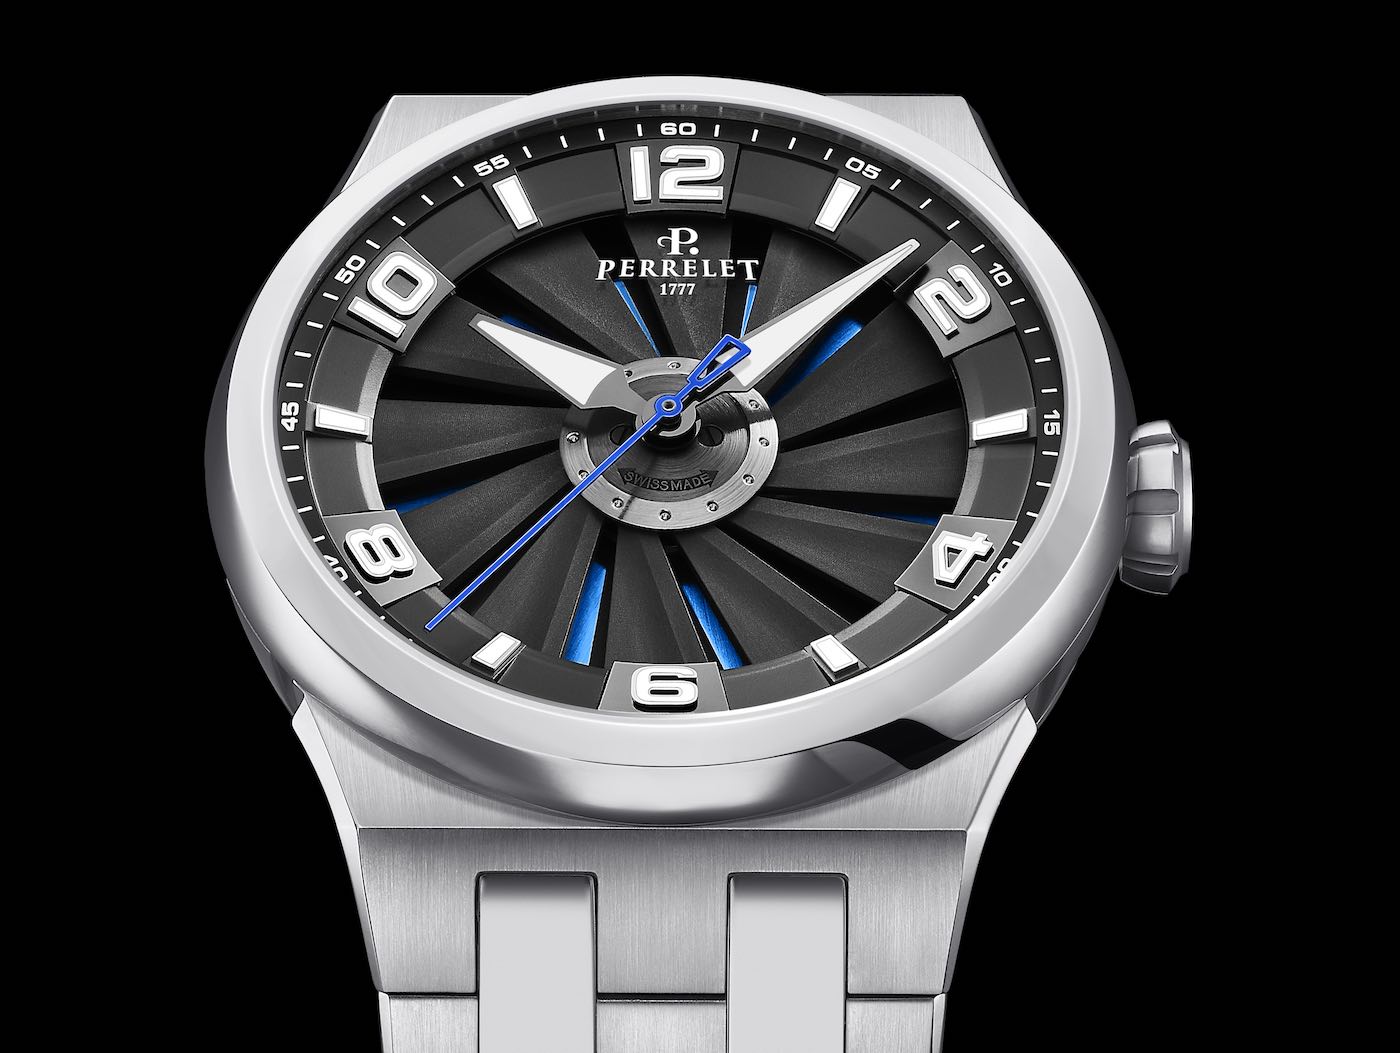 Perrelet marks a decade of its Turbine timepieces with a 